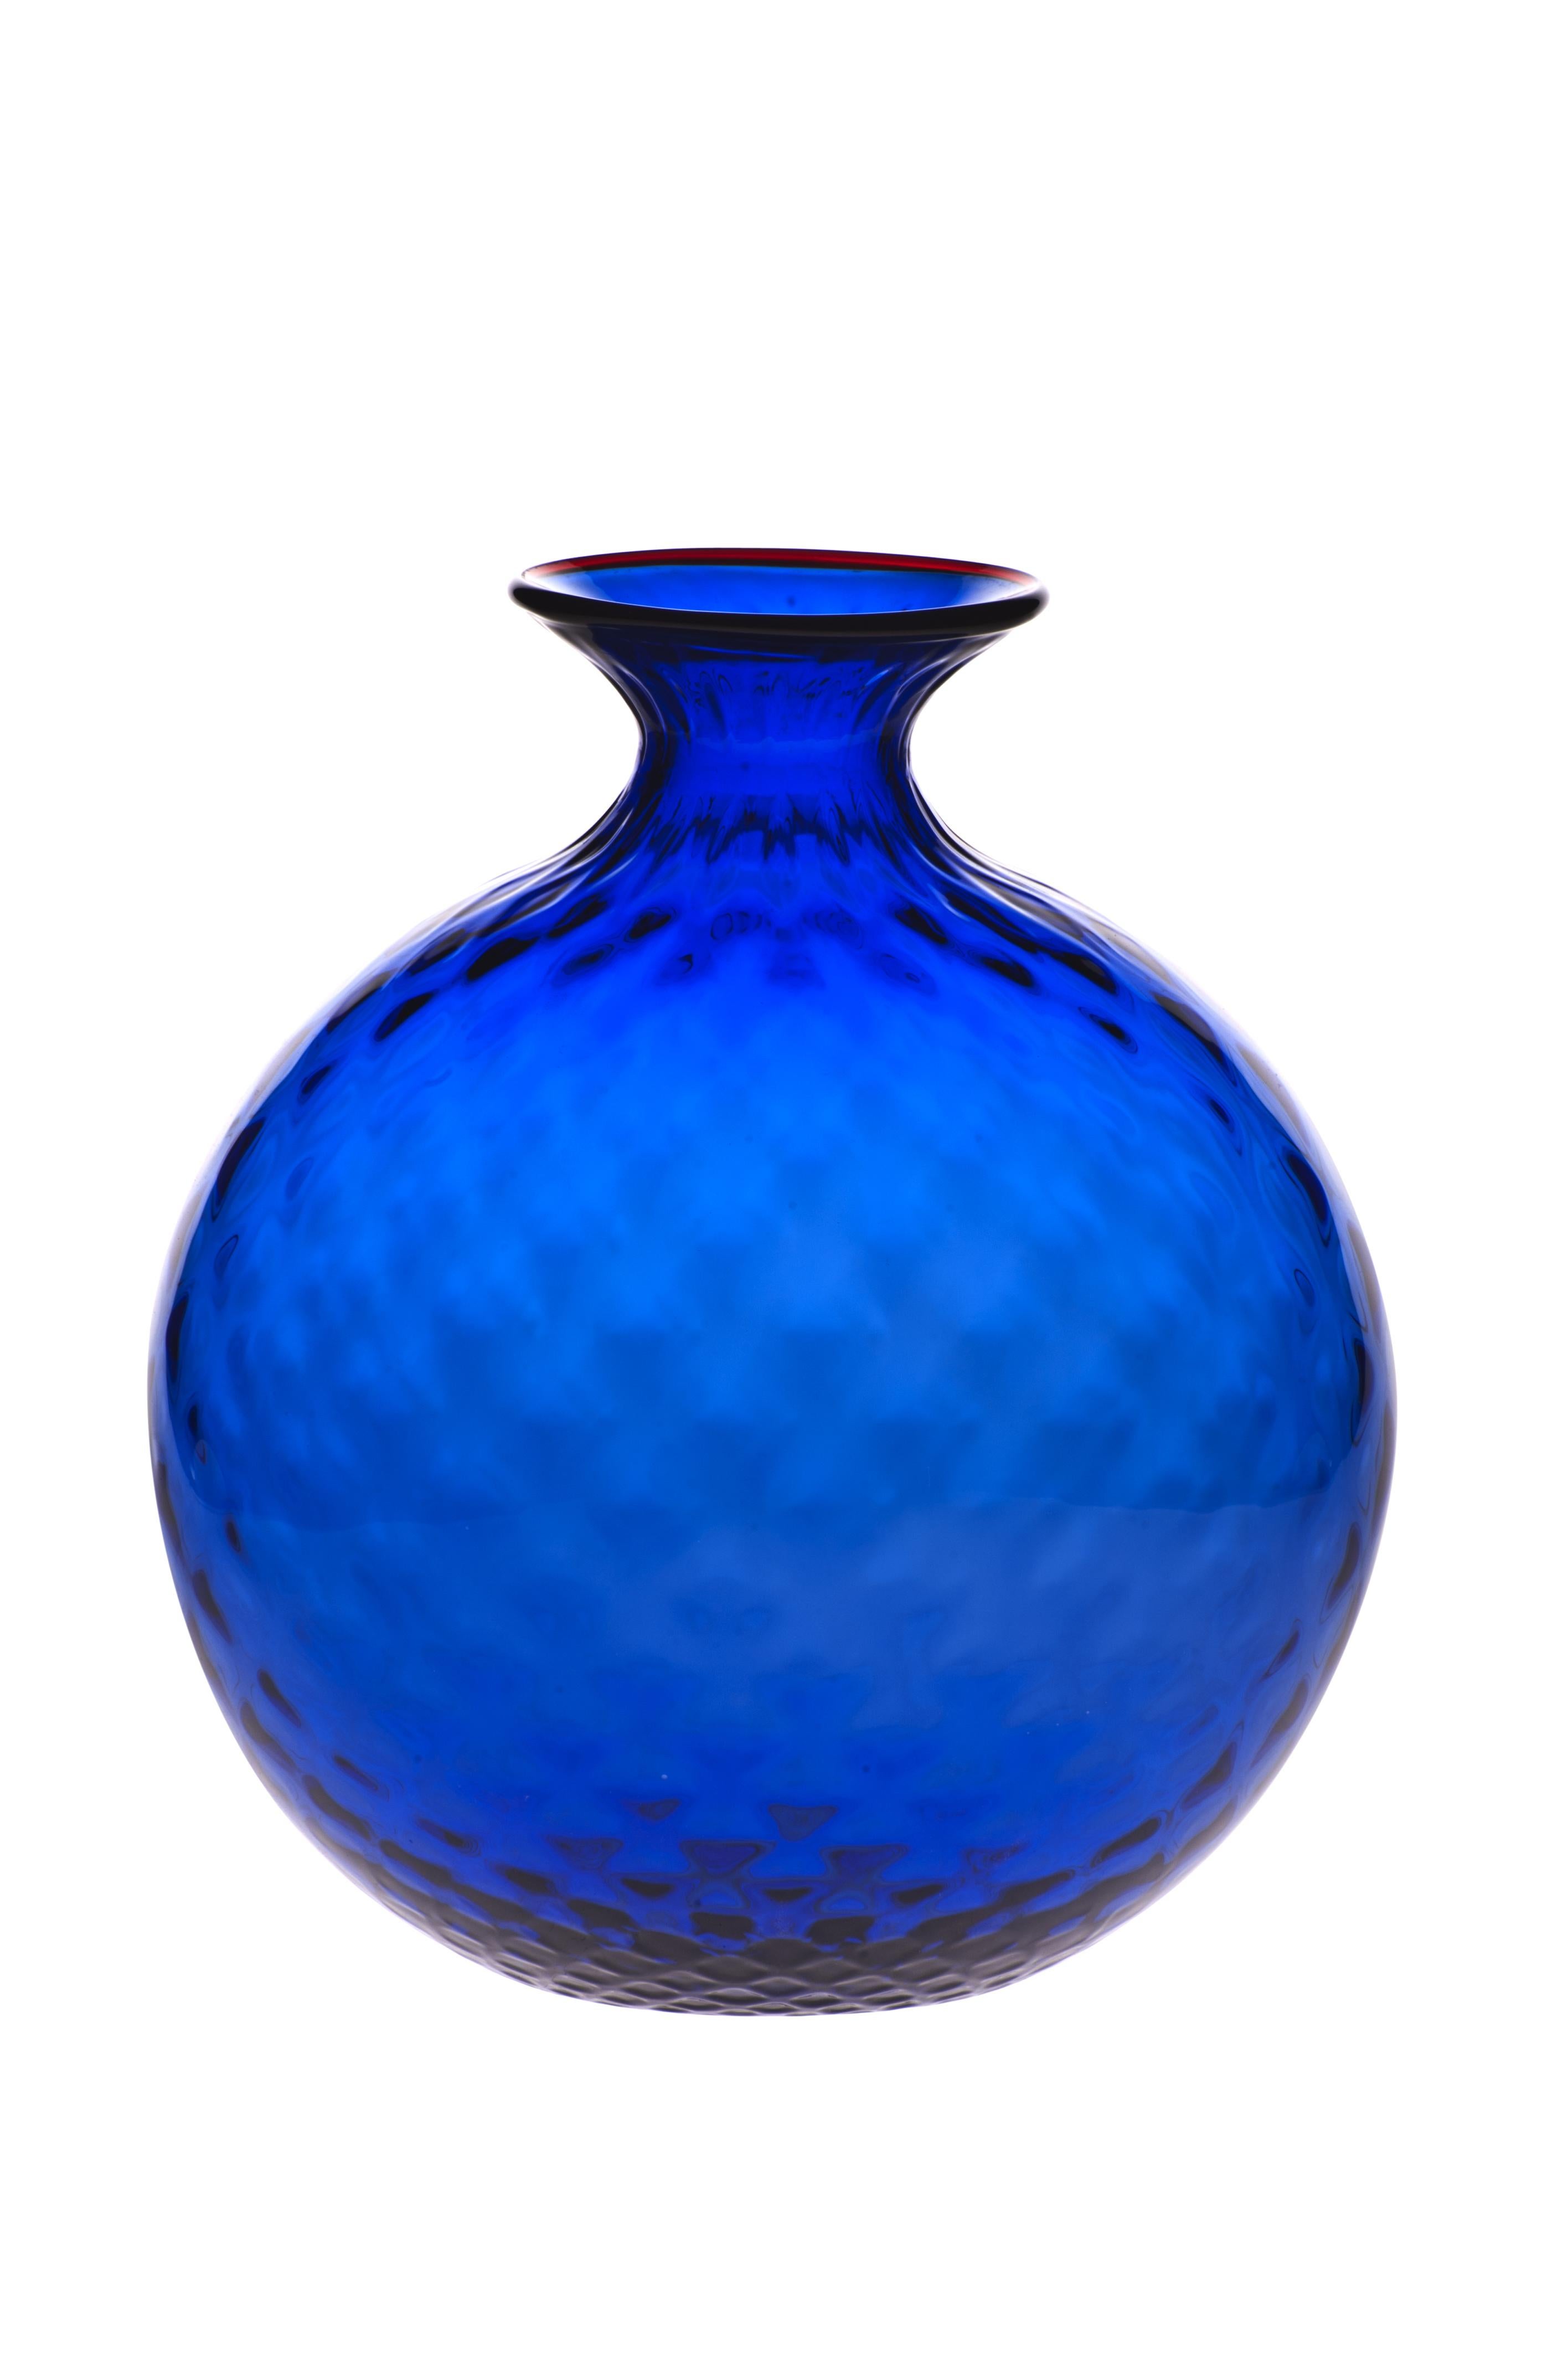 Venini glass vase with full body and textured surface with hexagonal shaped pattern in cobalt blue designed in 1970. Perfect for indoor home decor as container or strong statement piece for any room. Also available in other colors on 1stdibs.